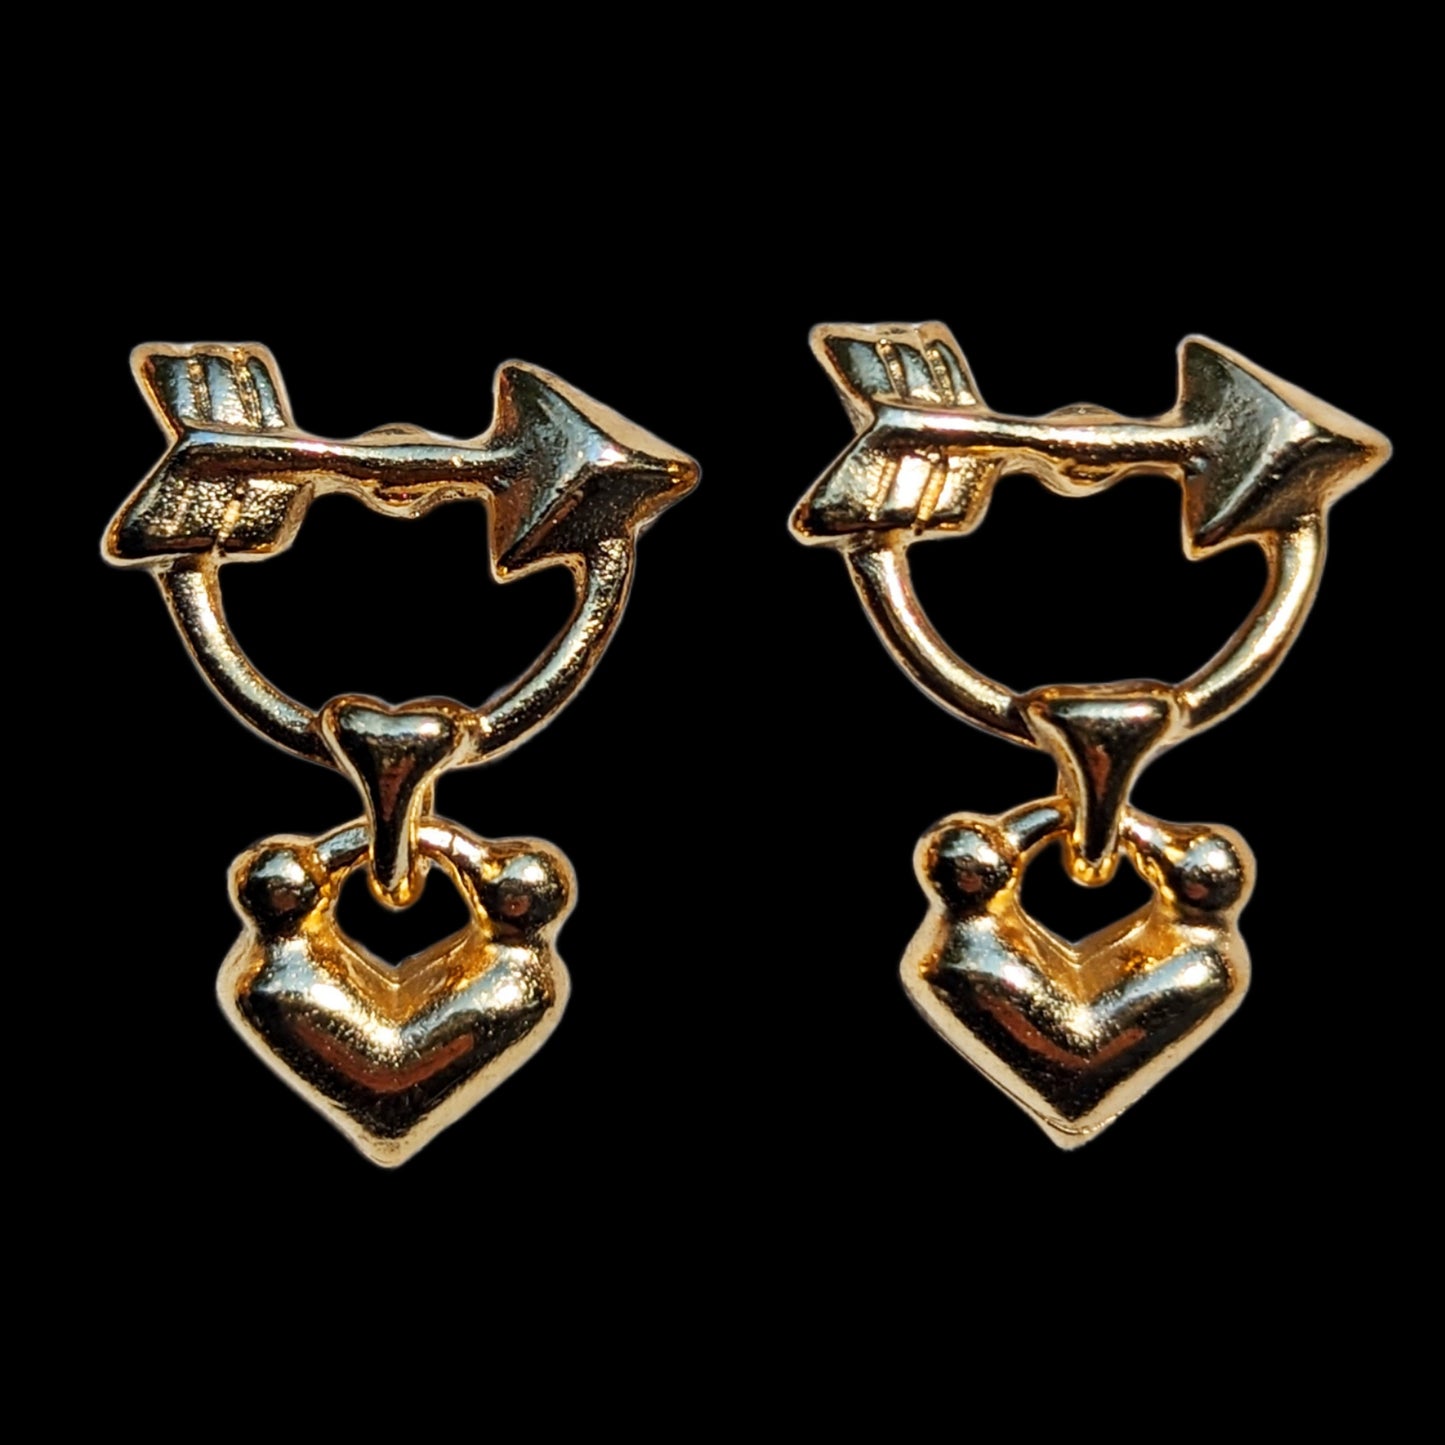 Small Dangle Heart Arrow Designer Gold Plated Post Earrings 1 inch Long USA Made by Sugar Gay Isber unisex-adult